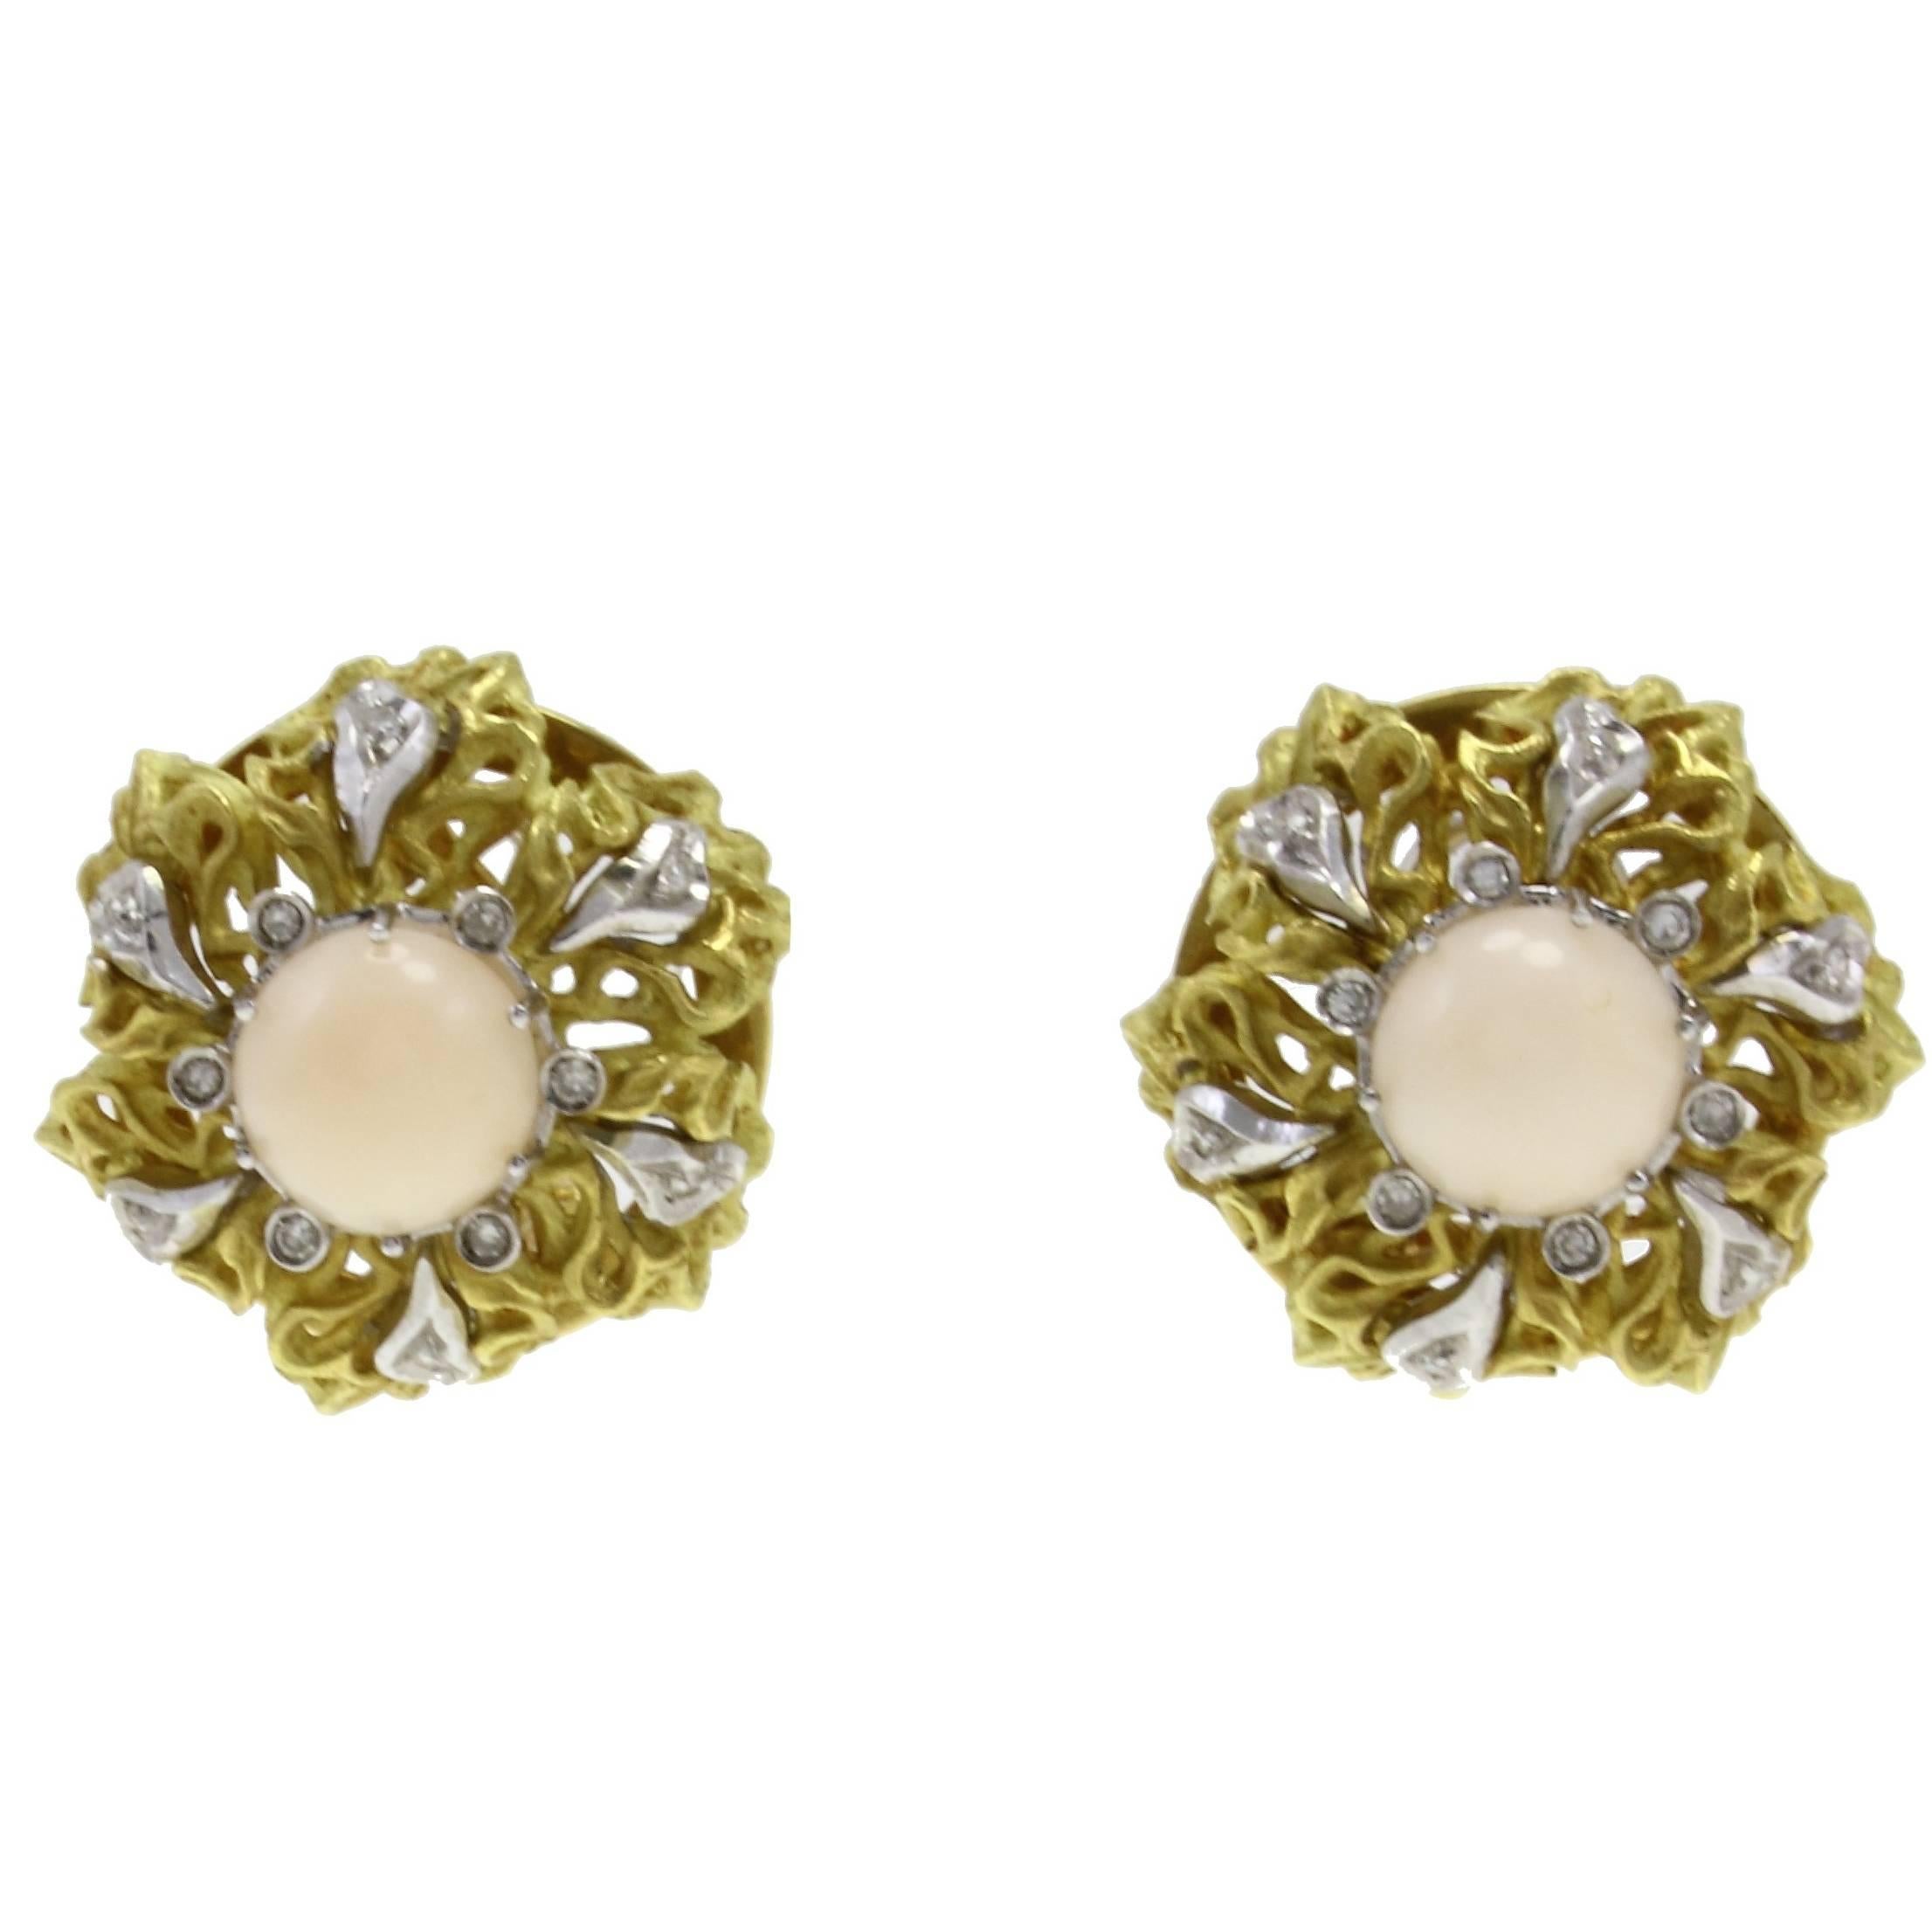 White Diamonds, Pink Coral Buttons, 18 Kt Yellow and White Gold Clip-on Earrings For Sale